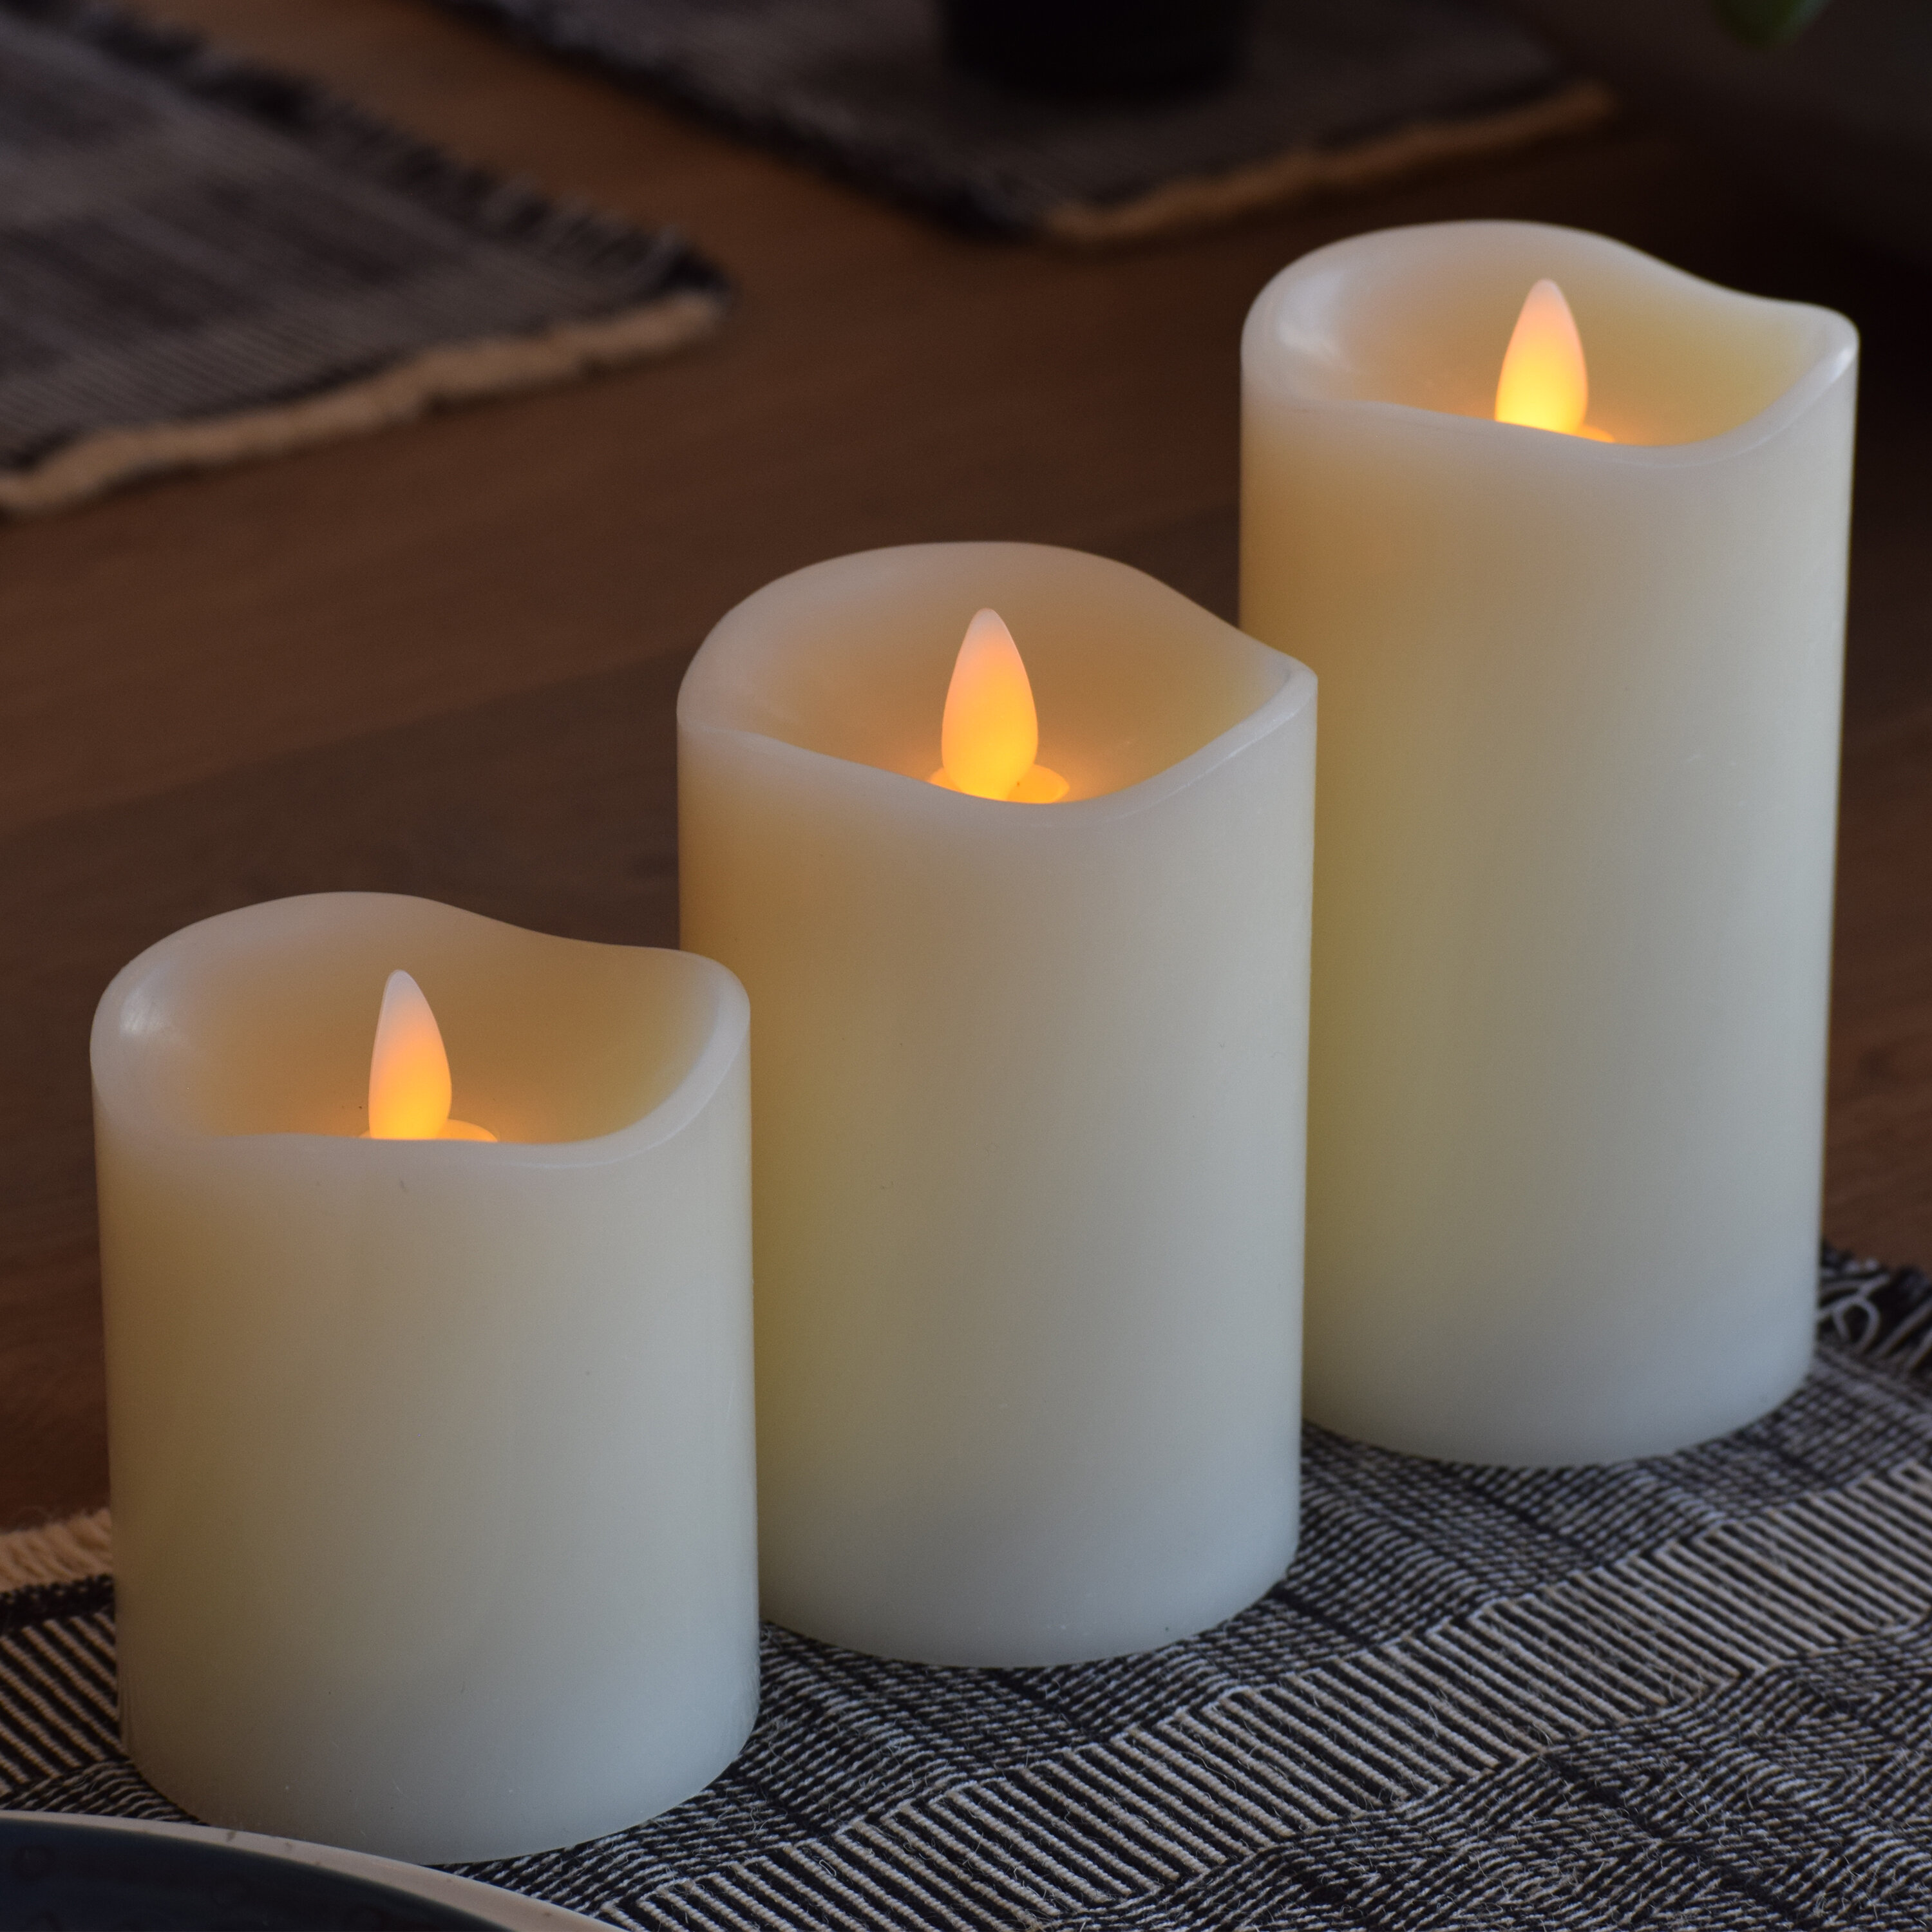 Unscented Flameless Candle with Wax Holder